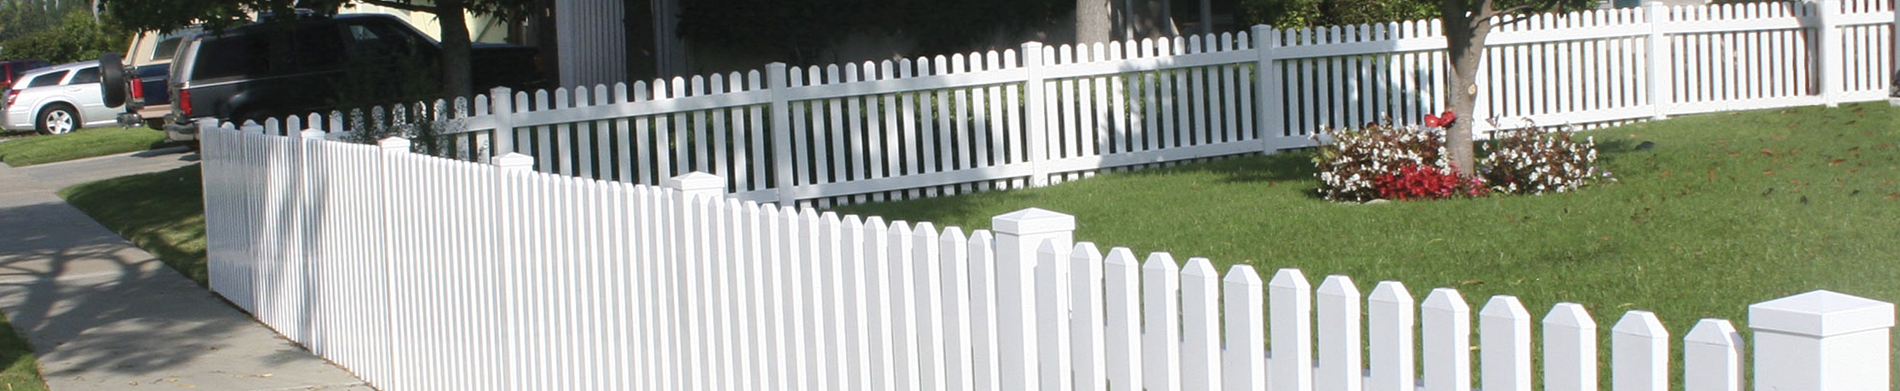 The Ultimate Guide To Selecting Vinyl Fencing For Your Property